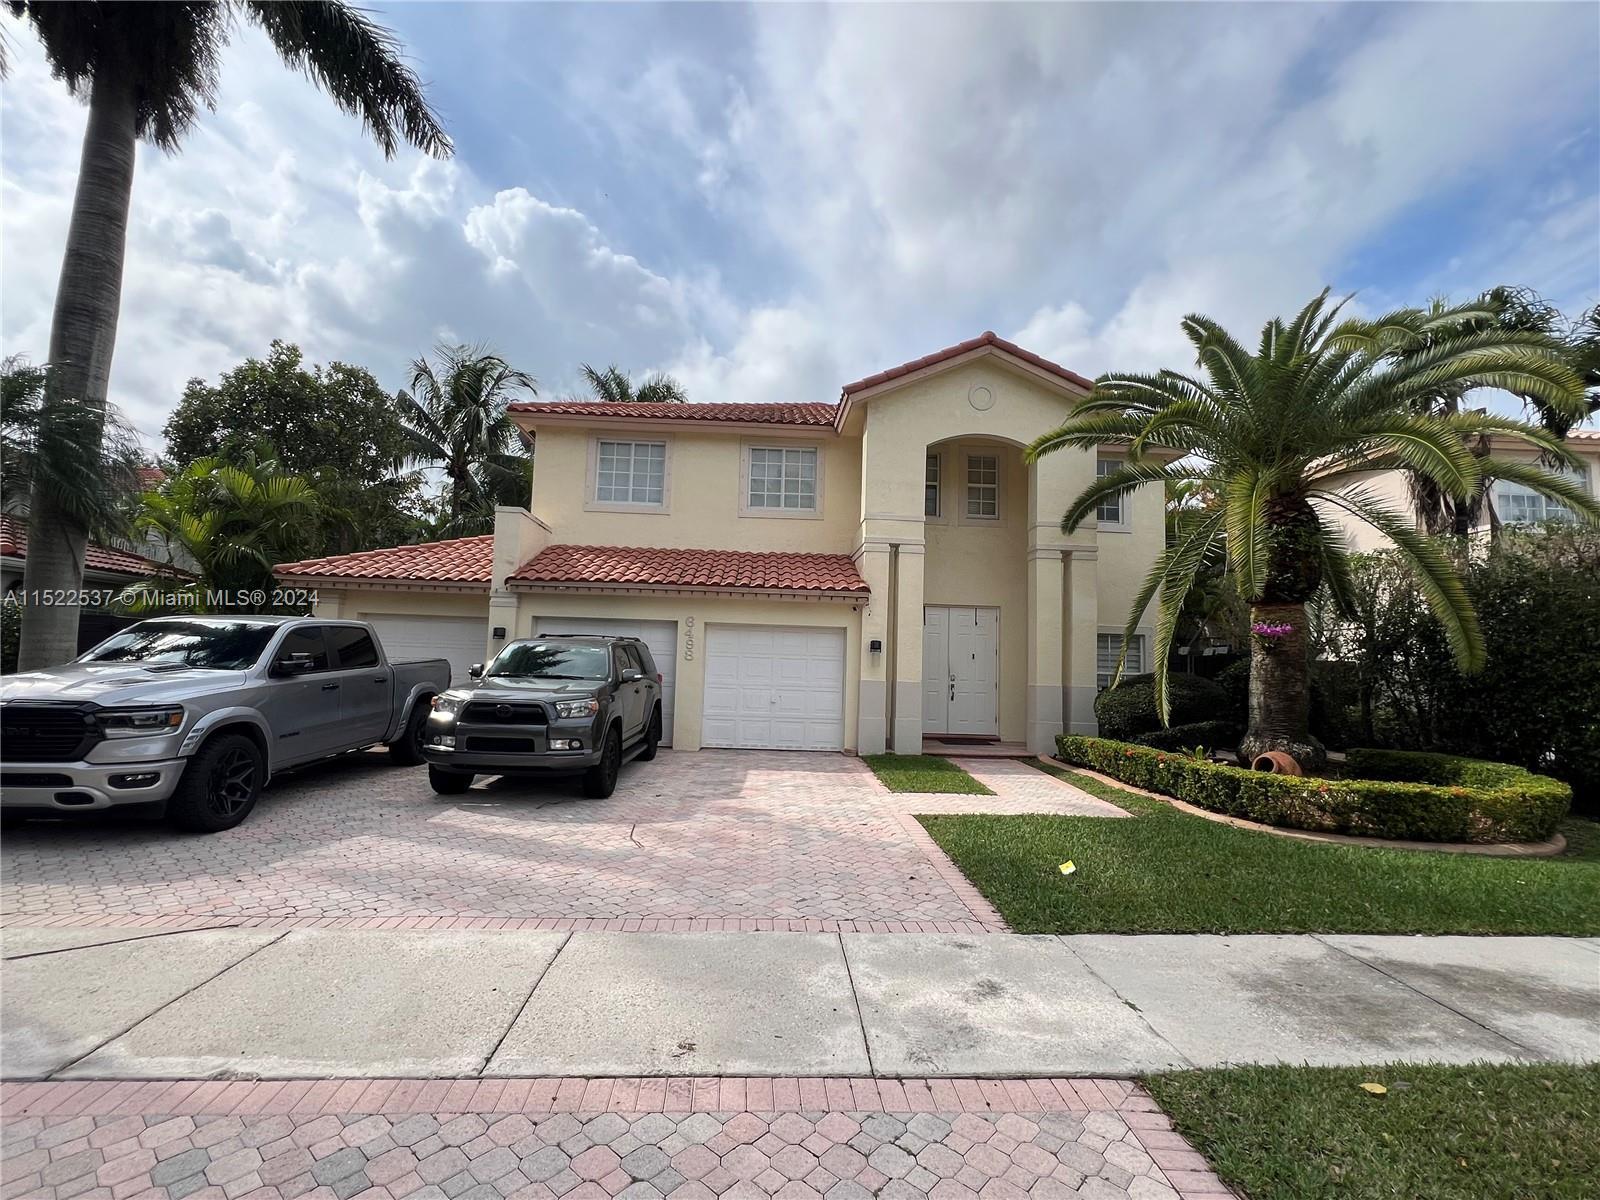 Photo of 6498 NW 113th Pl in Doral, FL